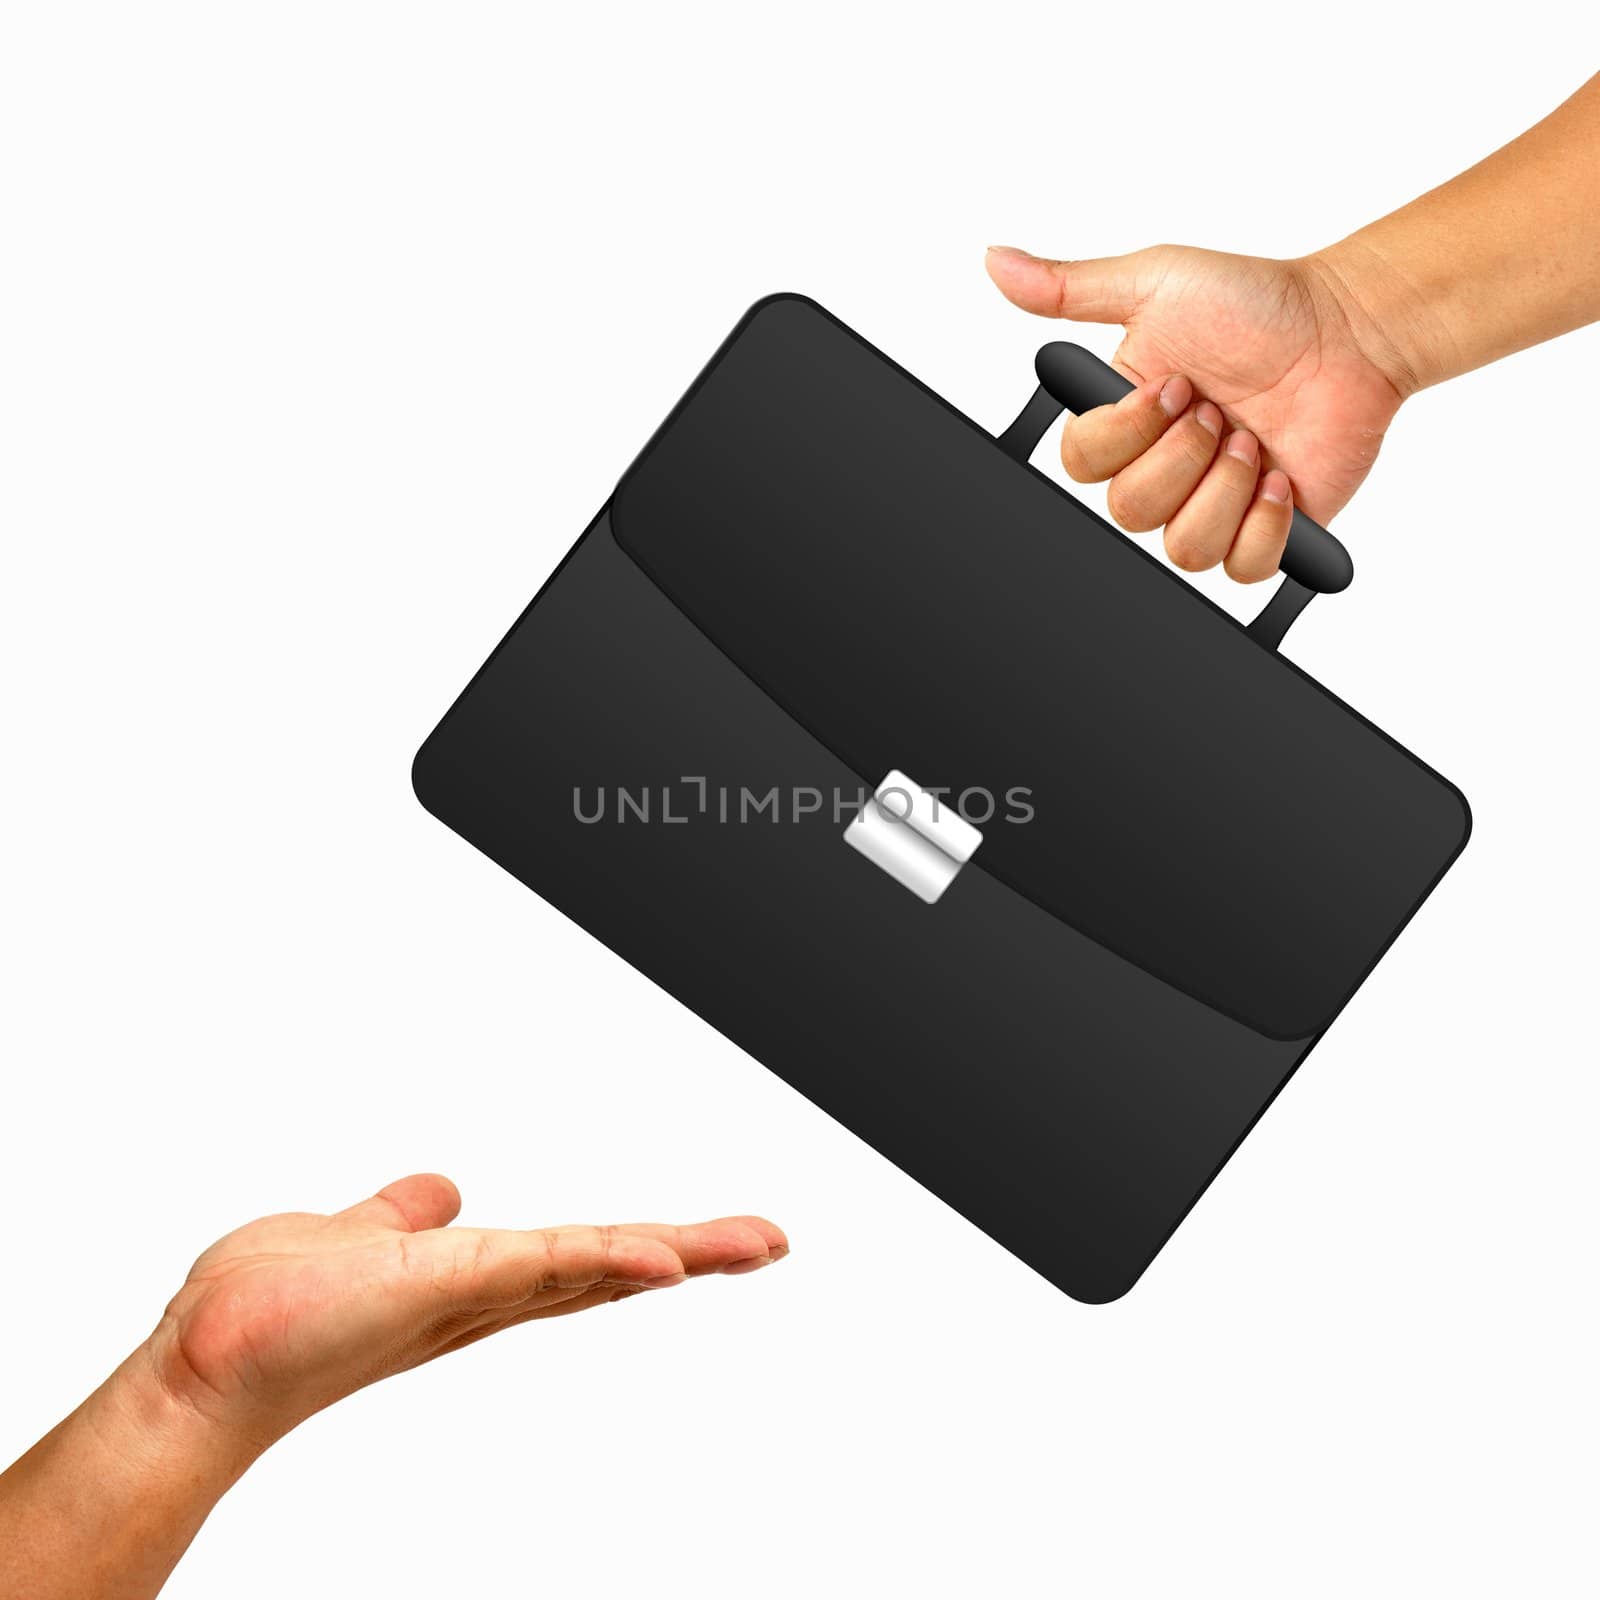 Hand with black briefcase